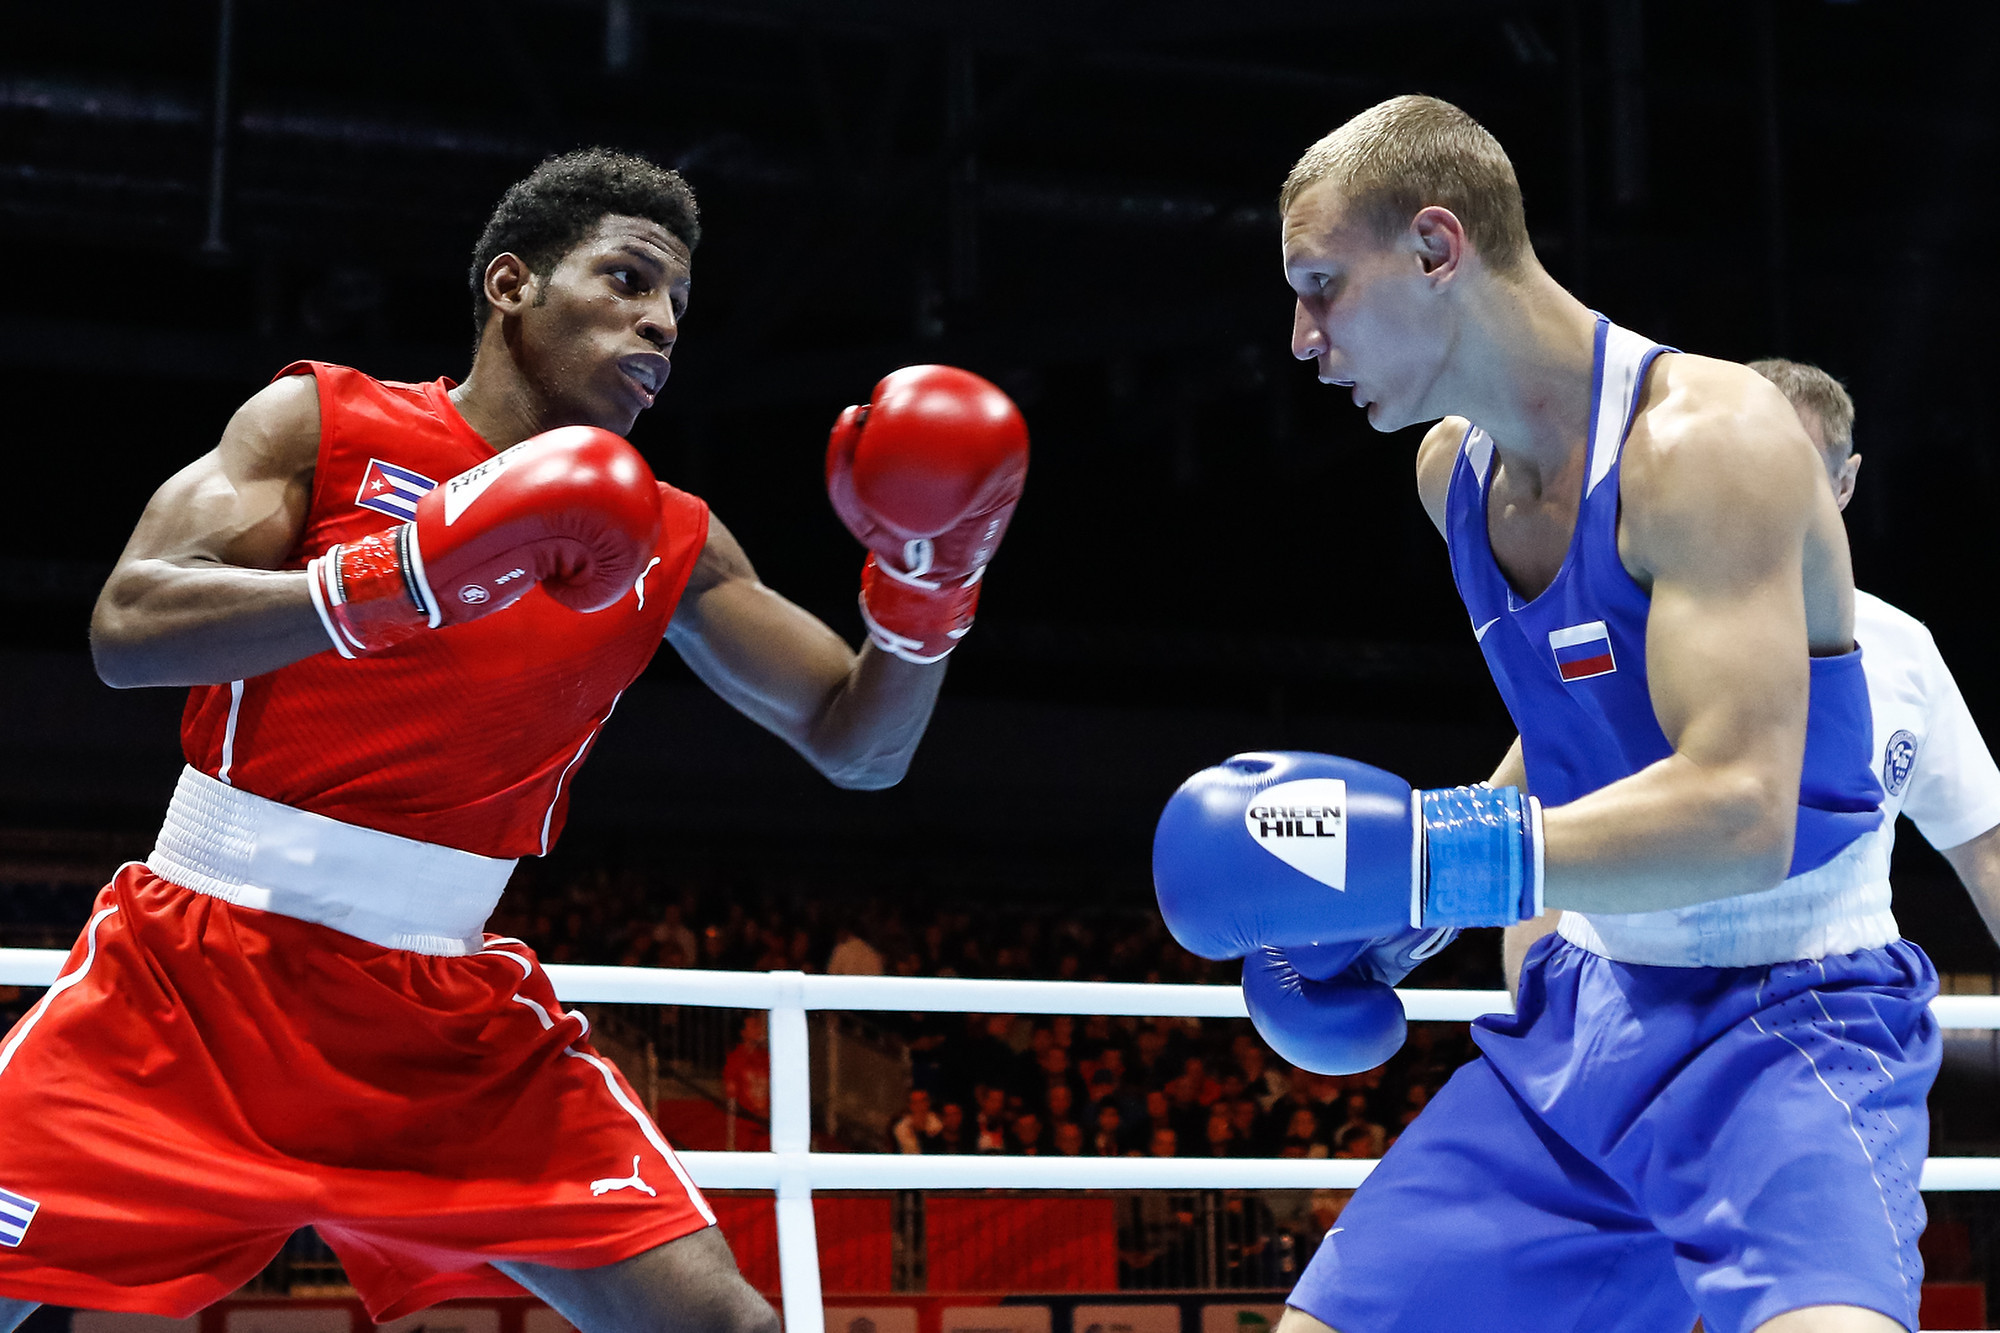 Ilia Popov was unable to replicate the feat of his compatriot Bakshi, losing unanimously to Cuba's Andy Cruz in the light welterweight division ©Yekateriburg 2019